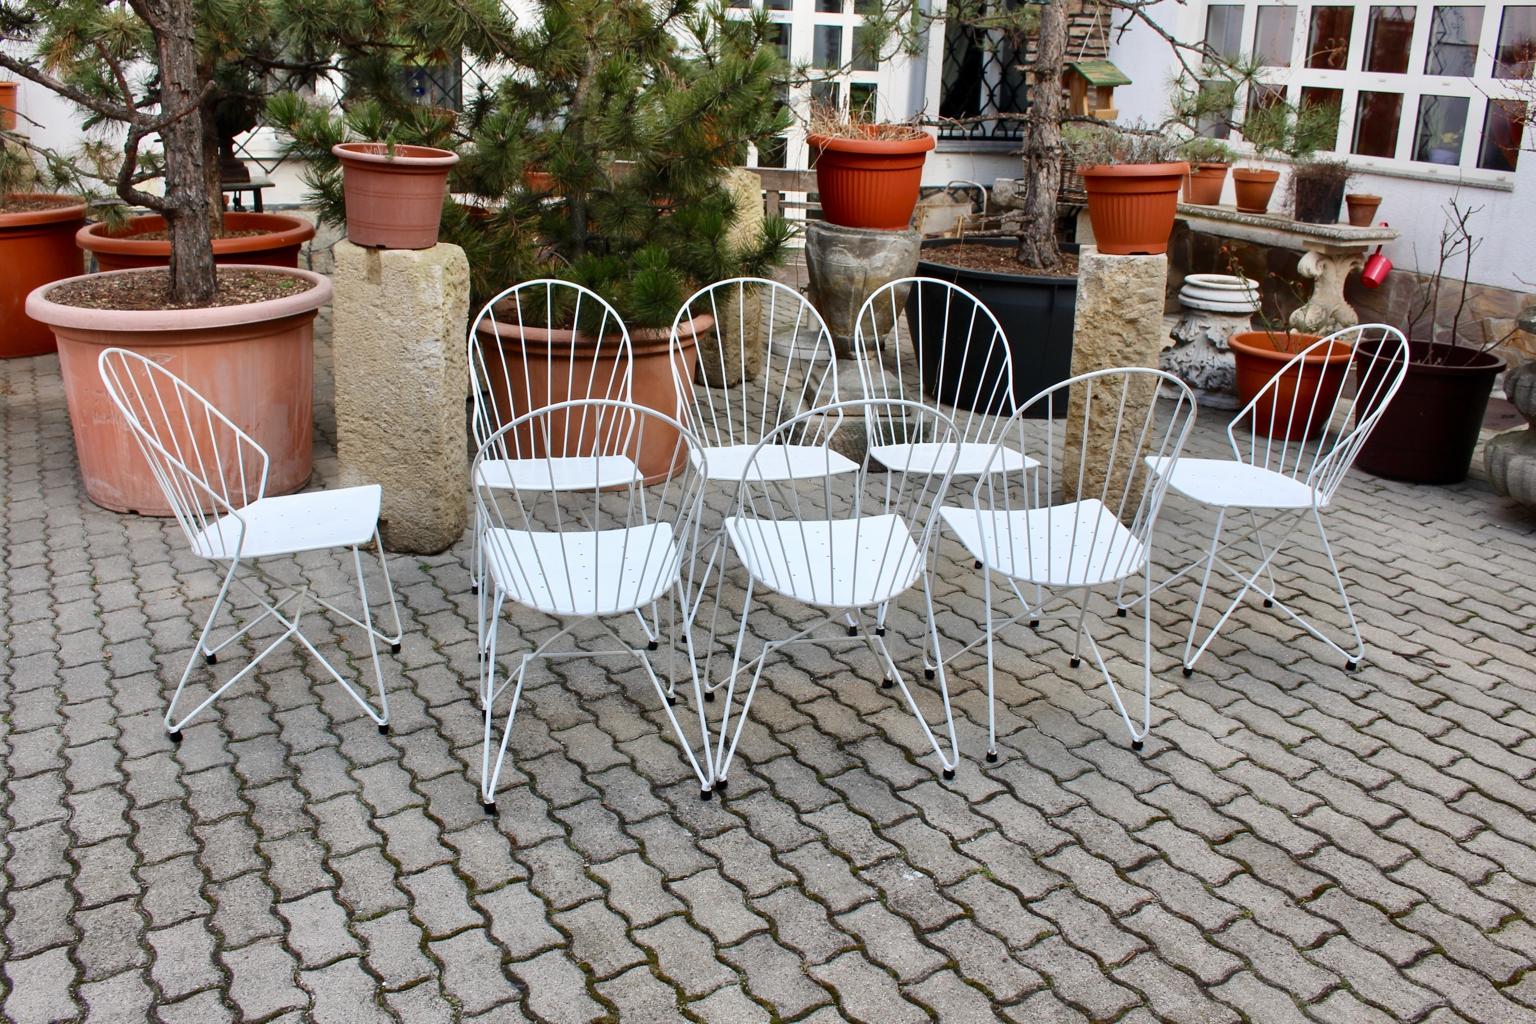 Mid Century Modern set of 8 white elegant metal armchairs designed by J.O.Wladar & V. Mödlhammer Vienna circa 1955 for Sonett Karl Fostel´s Sen. Erben.
Also the garden chairs were made of wire steel and perforated sheet metal with black rubber